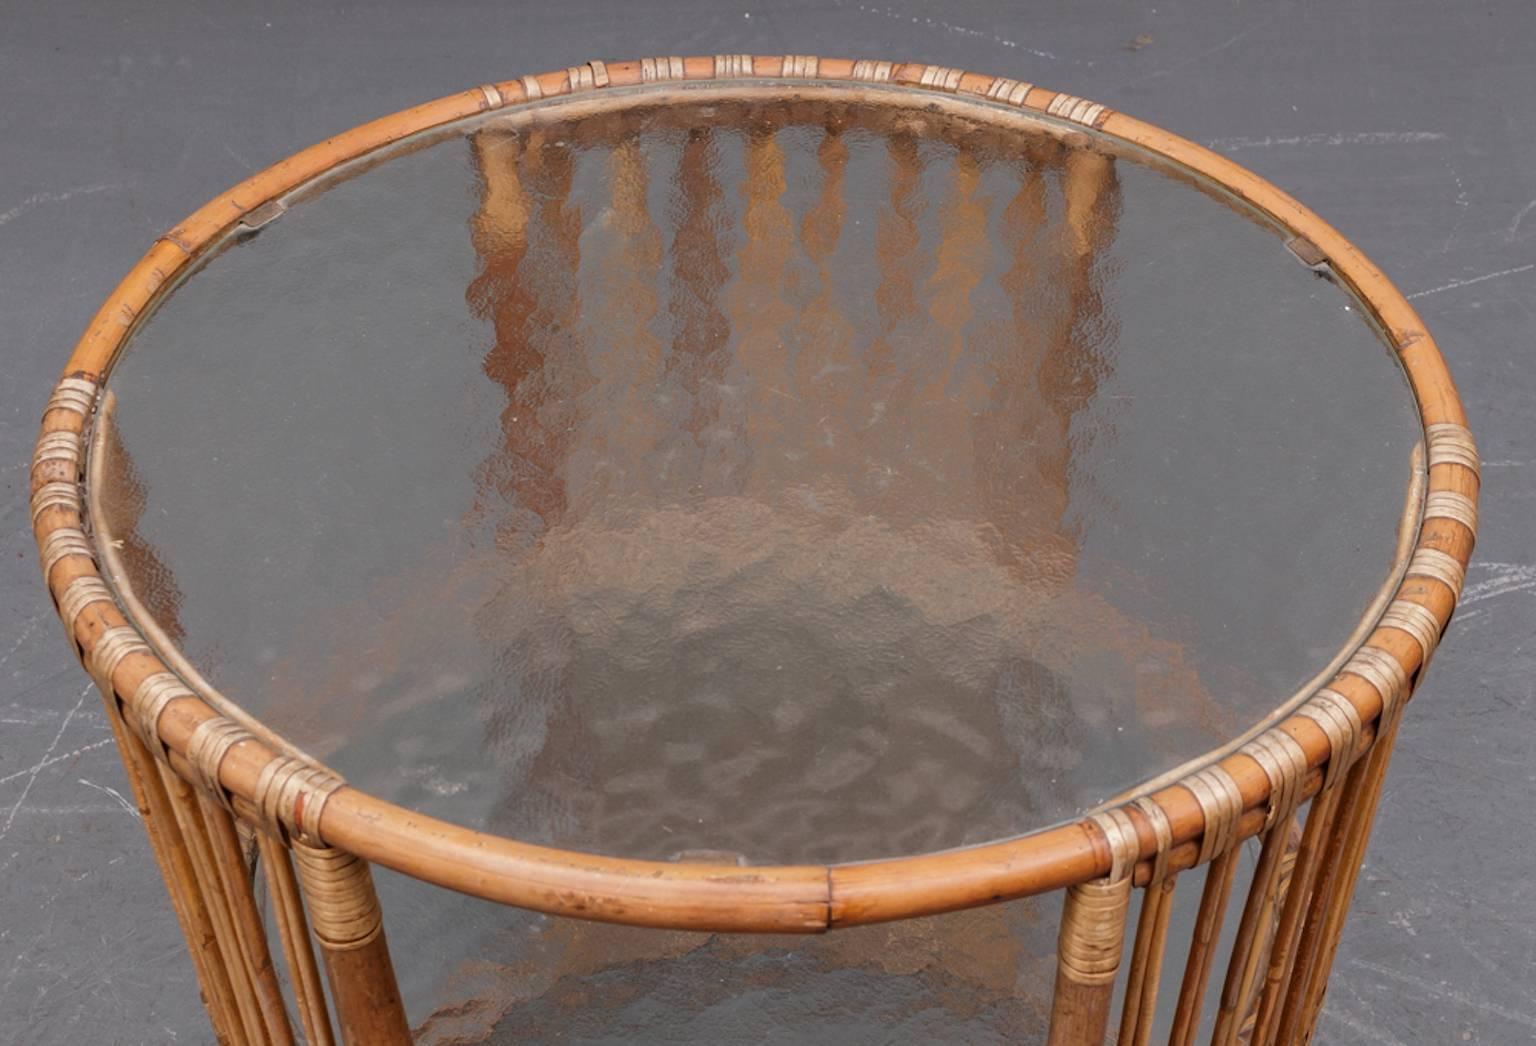 Danish rattan table in the style of Viggo Boesen, 1940s Danish modern,
with frosted glass top.